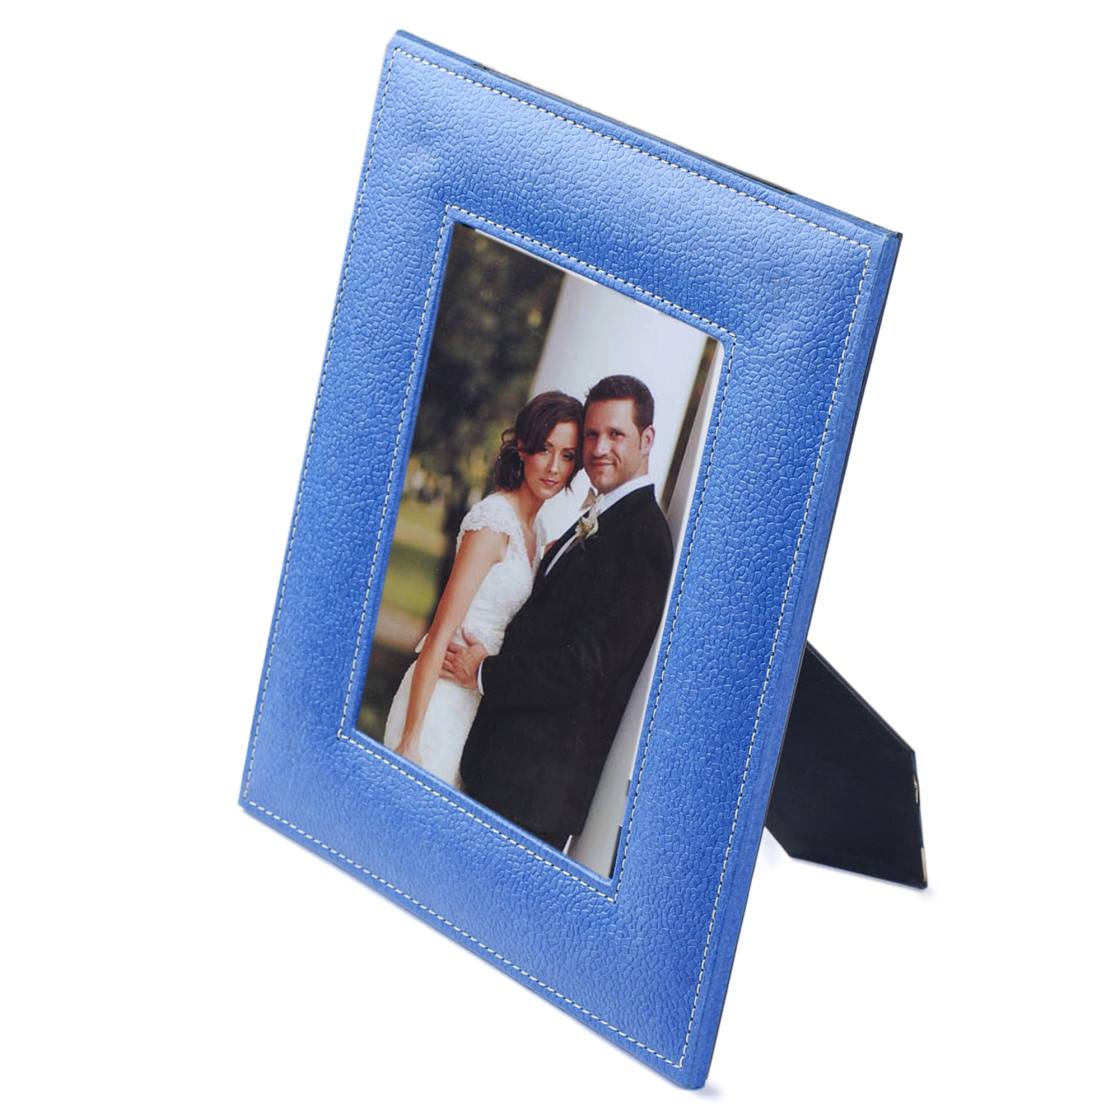 Ecoleatherette 5"x7" Photo Frame with Hanging and Standing Options (RPF57.D.Blue)